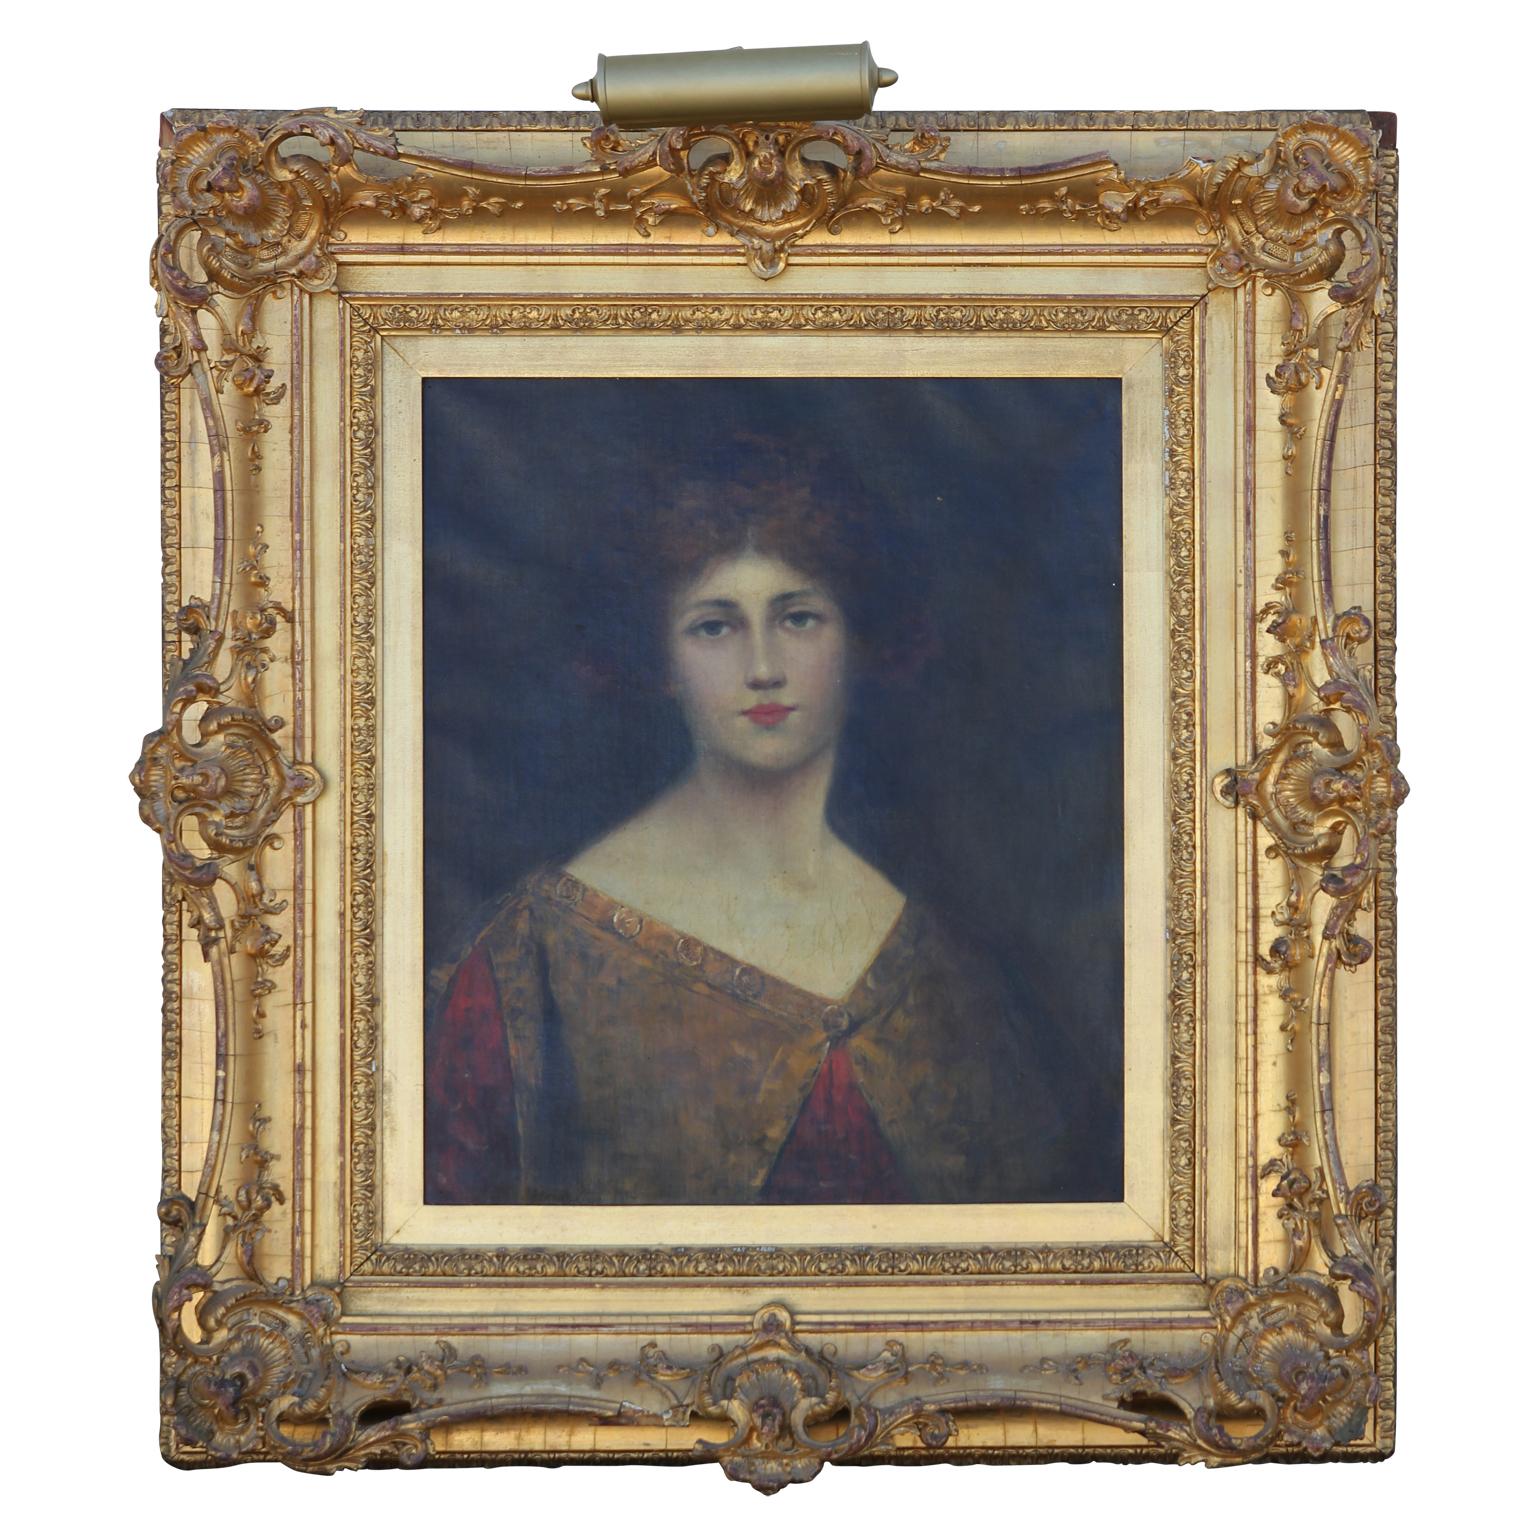 Unknown Portrait Painting - Early Portrait of a Young Woman